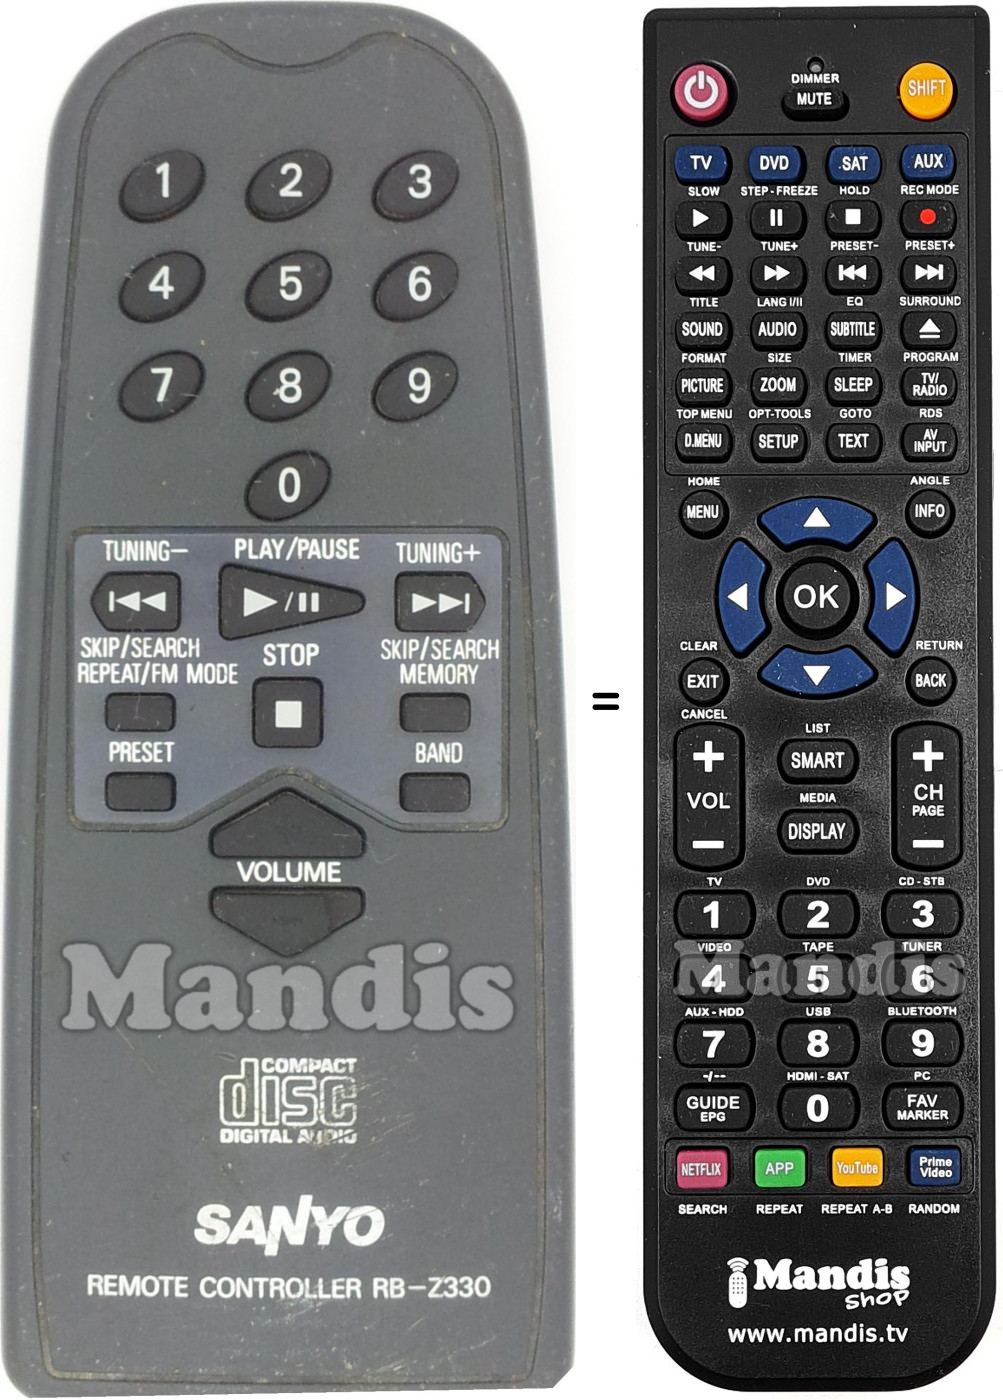 Replacement remote control RB-Z330